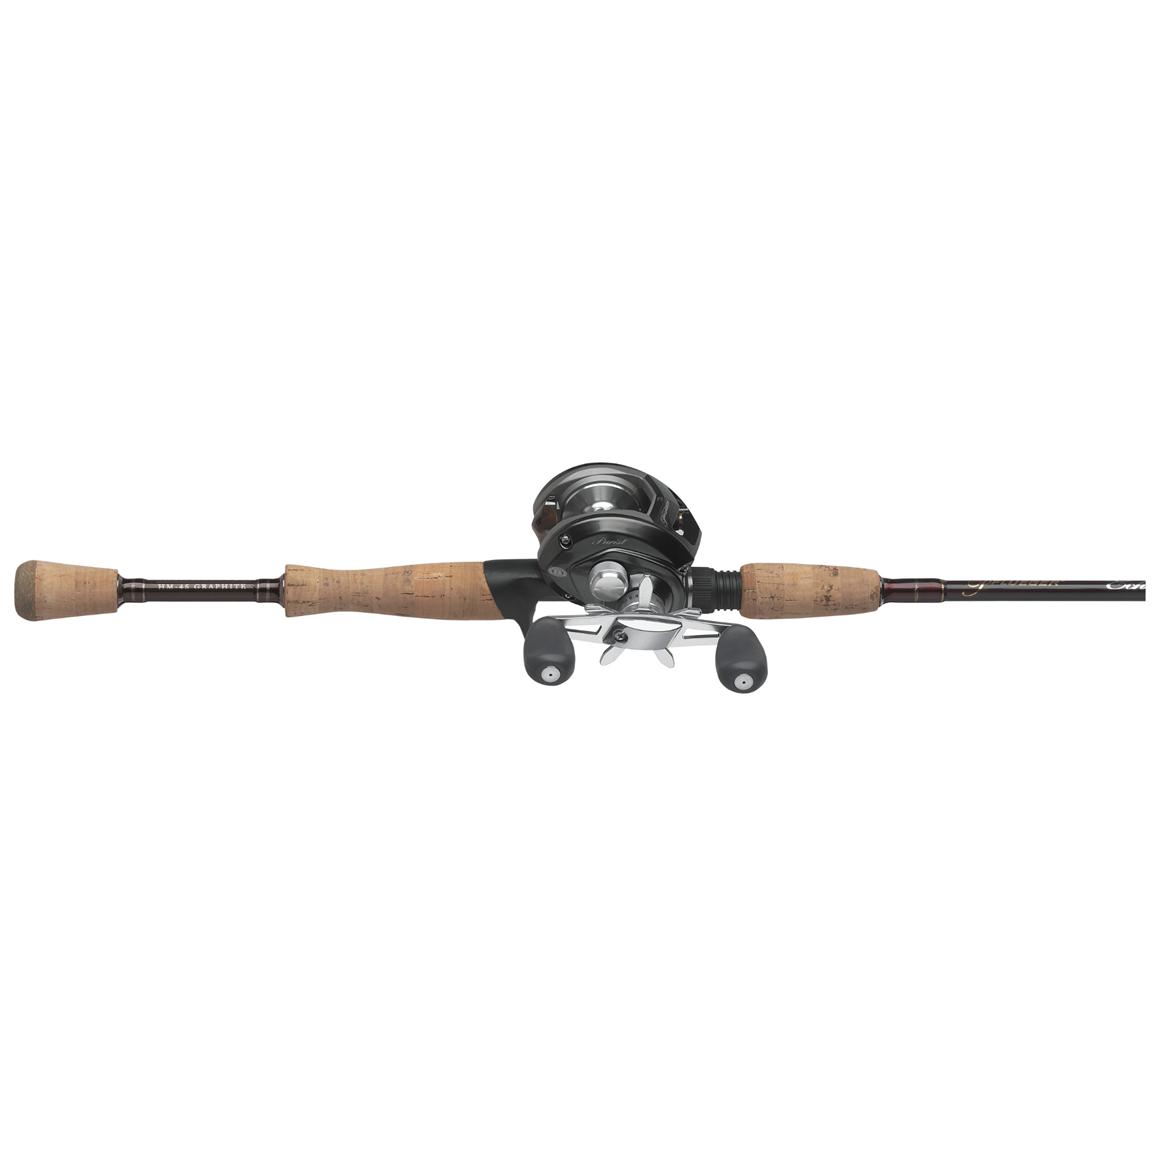 Pflueger Purist Rod and Reel Combo - 217885, Casting Combos at